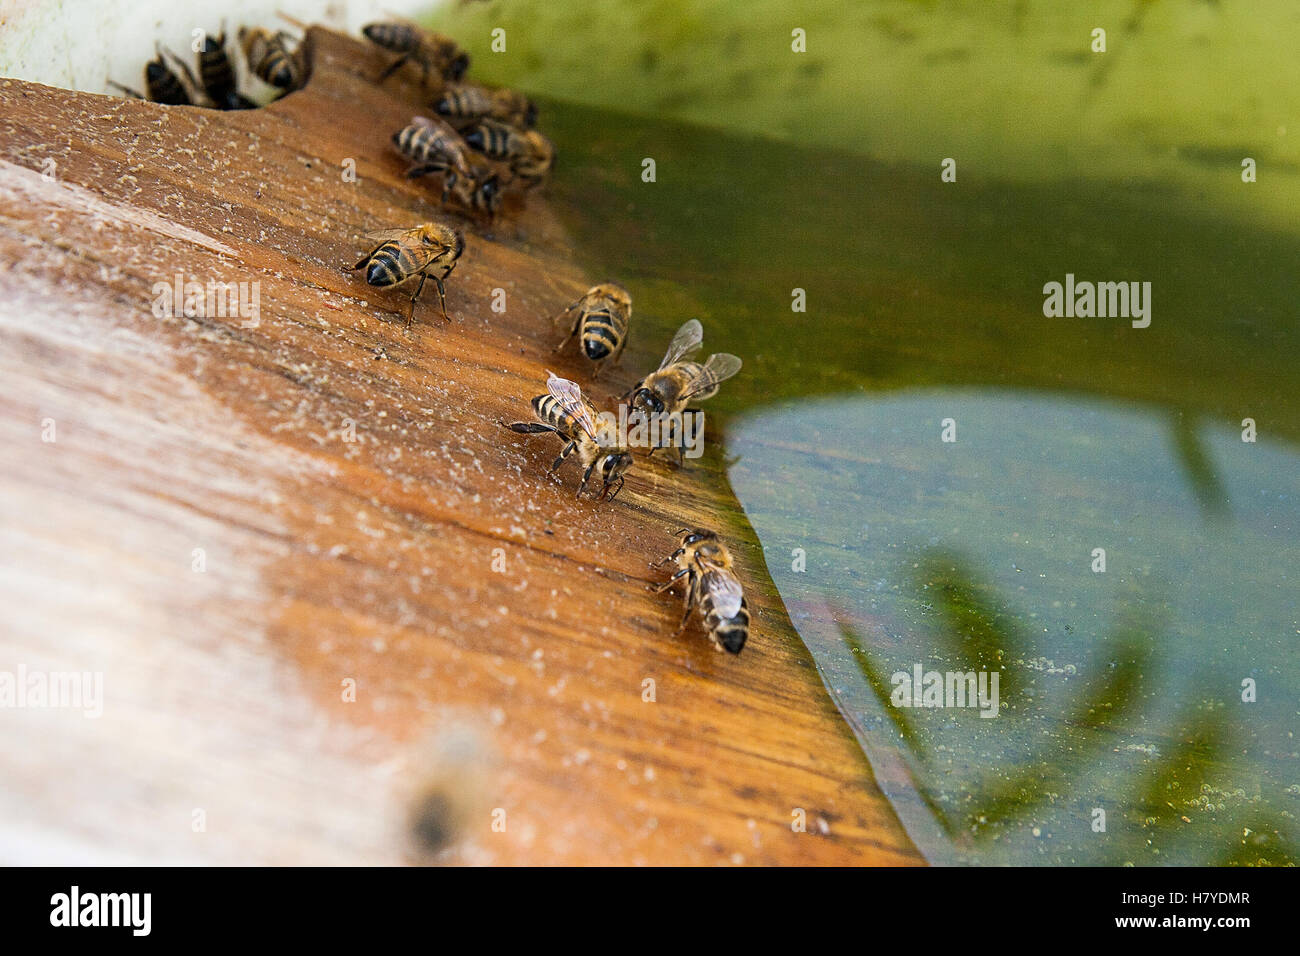 Busy bees, close up view of the working bees. Bees close up showing animals drinking water at summer time. Stock Photo